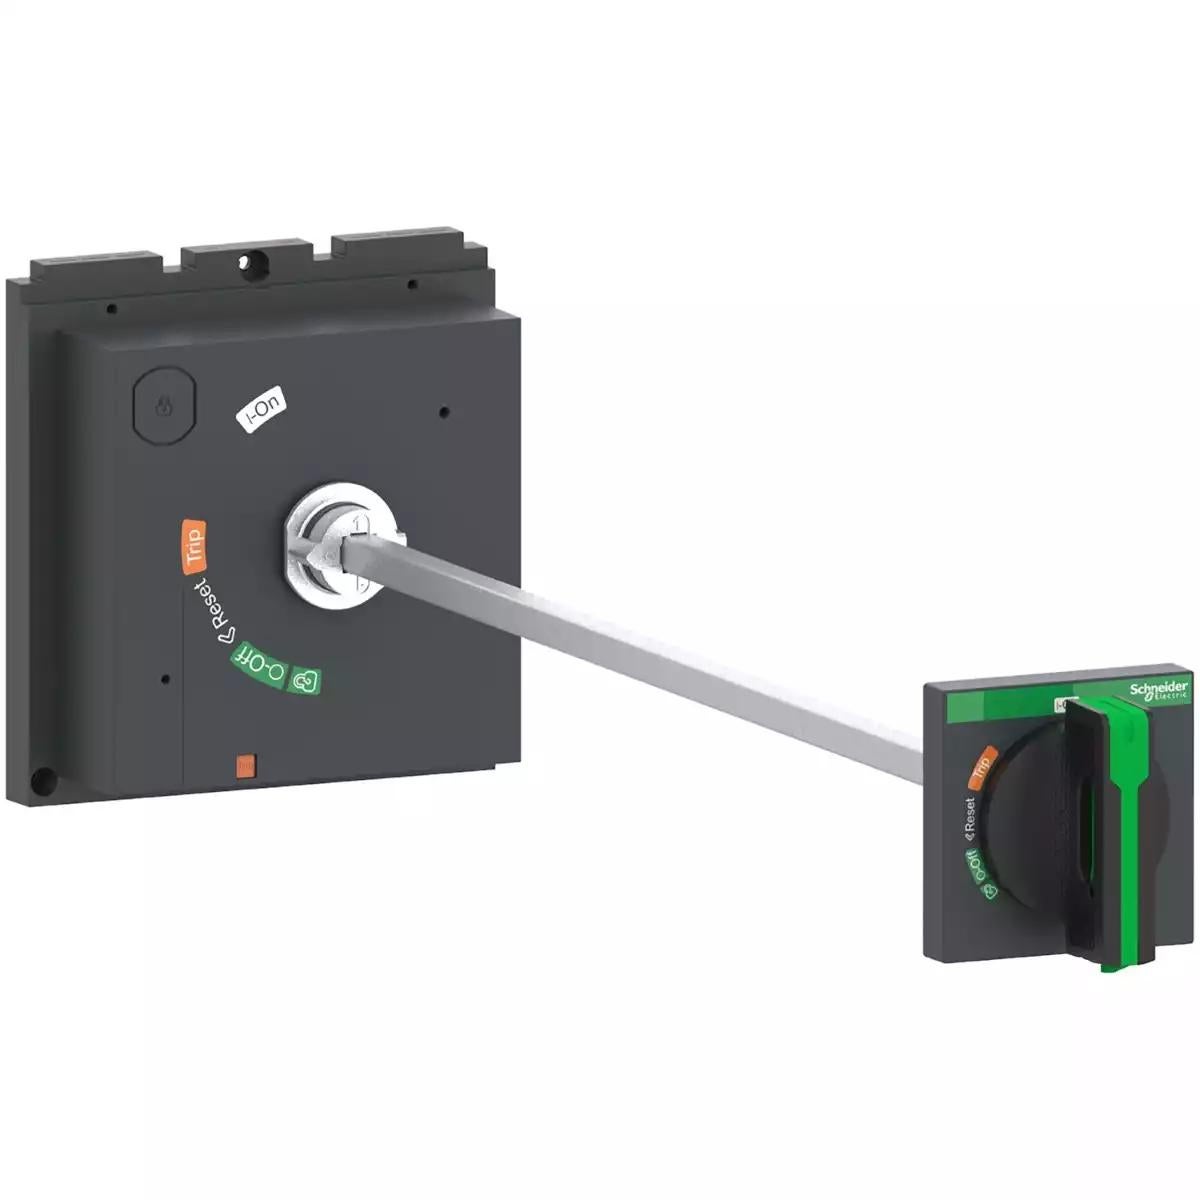 Schneider Electric extended rotary handle, ComPacT NSX 400/630, black handle, shaft length 209 to 600 mm, IP55